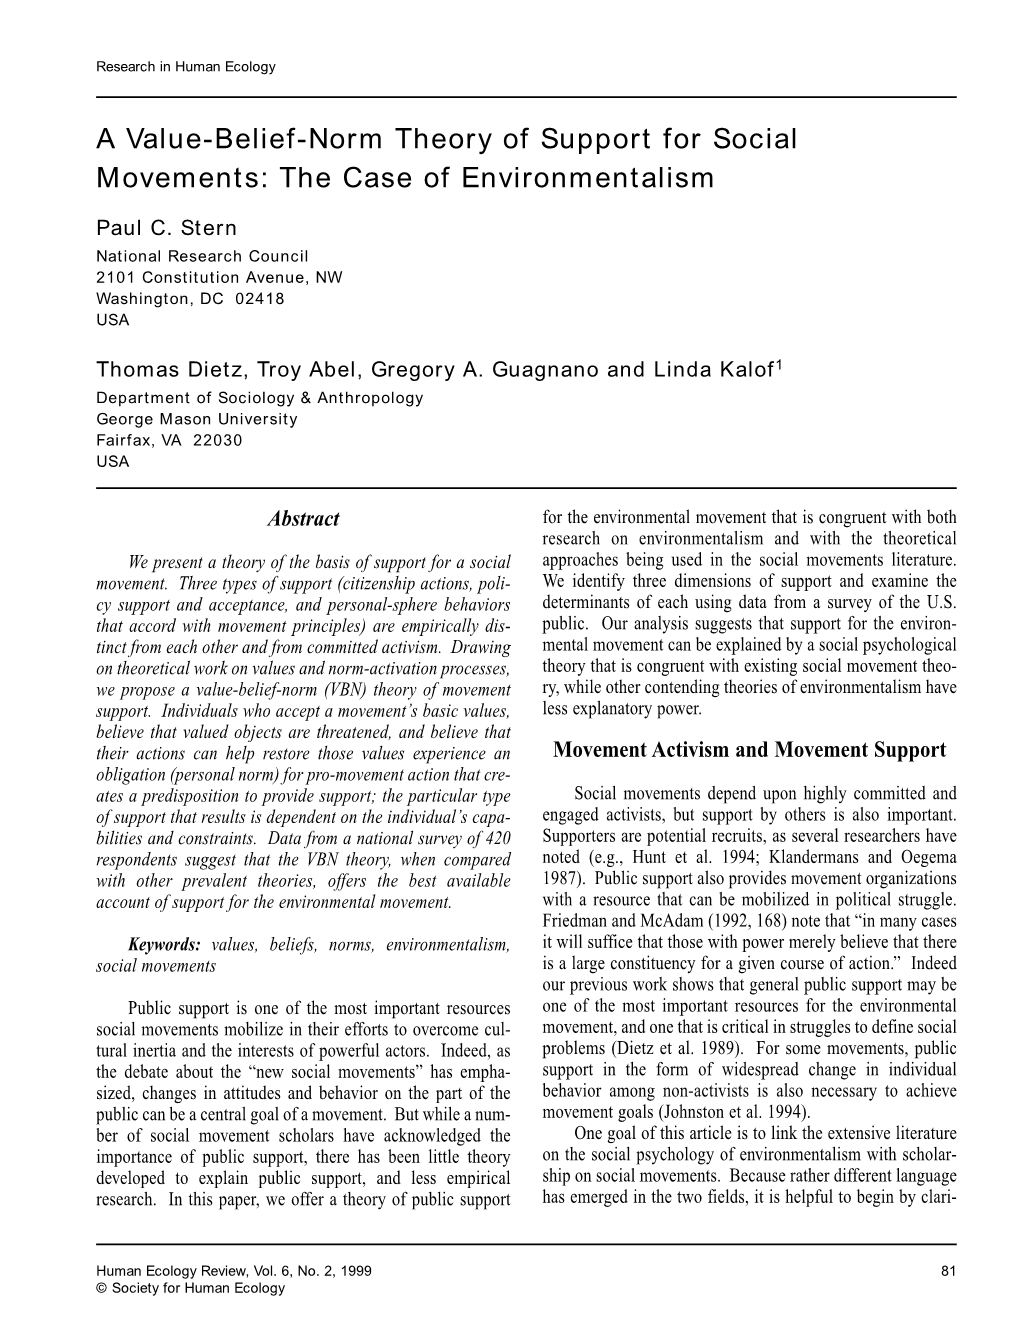 A Value-Belief-Norm Theory of Support for Social Movements: the Case of Environmentalism